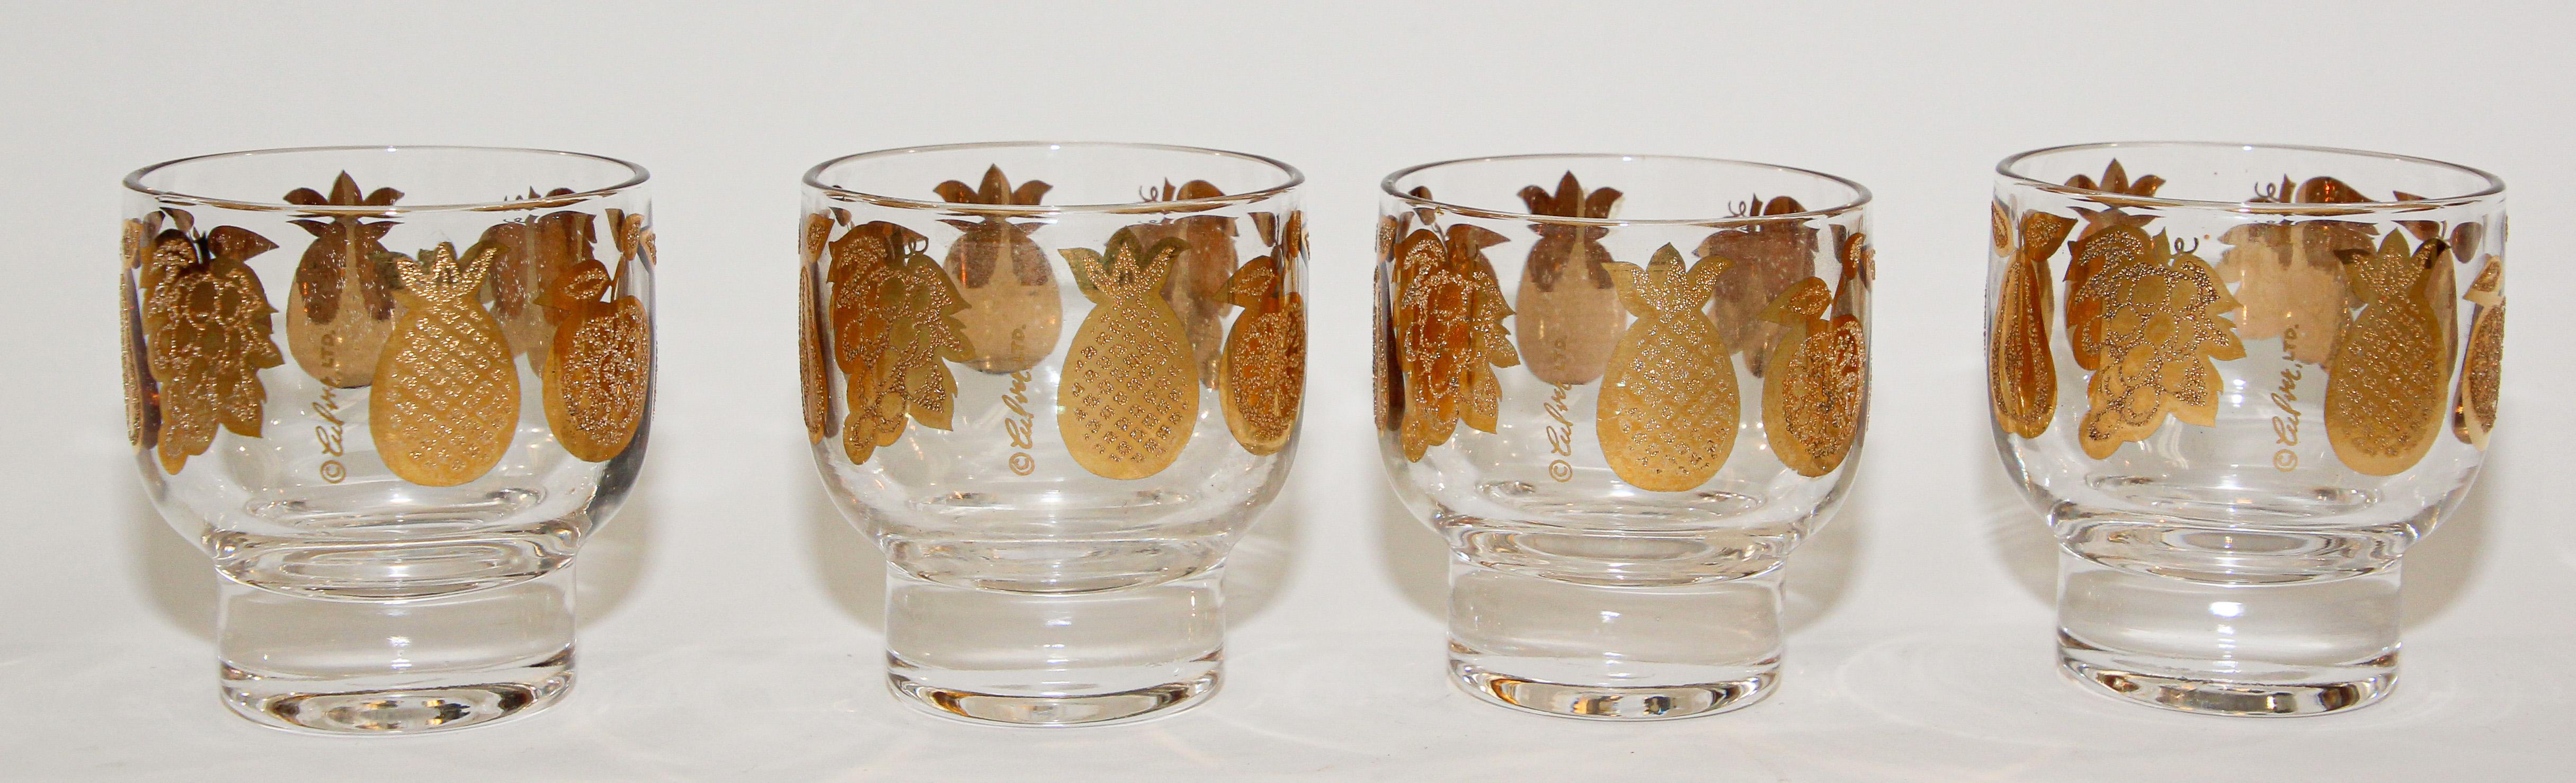 Elegant vintage midcentury Culver barware glasses with a gold leaf finish. 
Vintage Culver Florentine pattern footed cocktail glasses decorated in smooth and textured 22k gold depicting apple, pear, pineapple and grapes.
Beautiful set of 22-karat